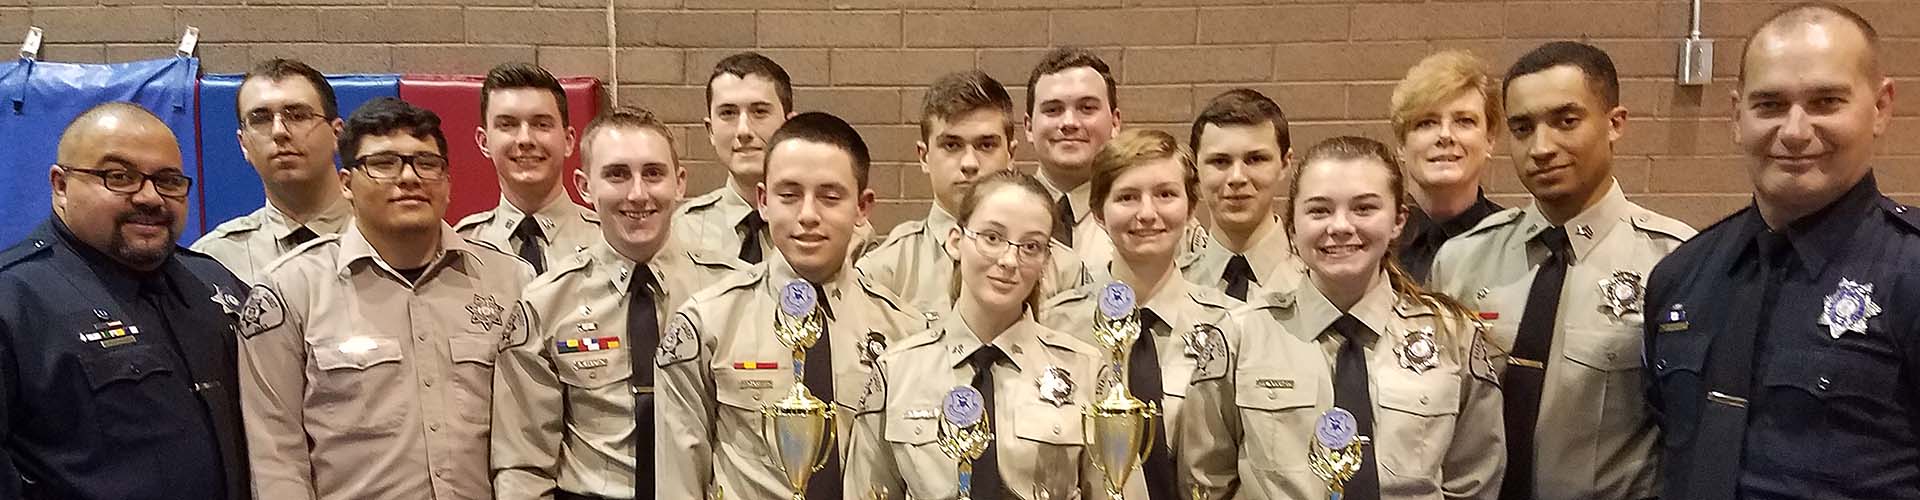 Sheriff's Office Cadets